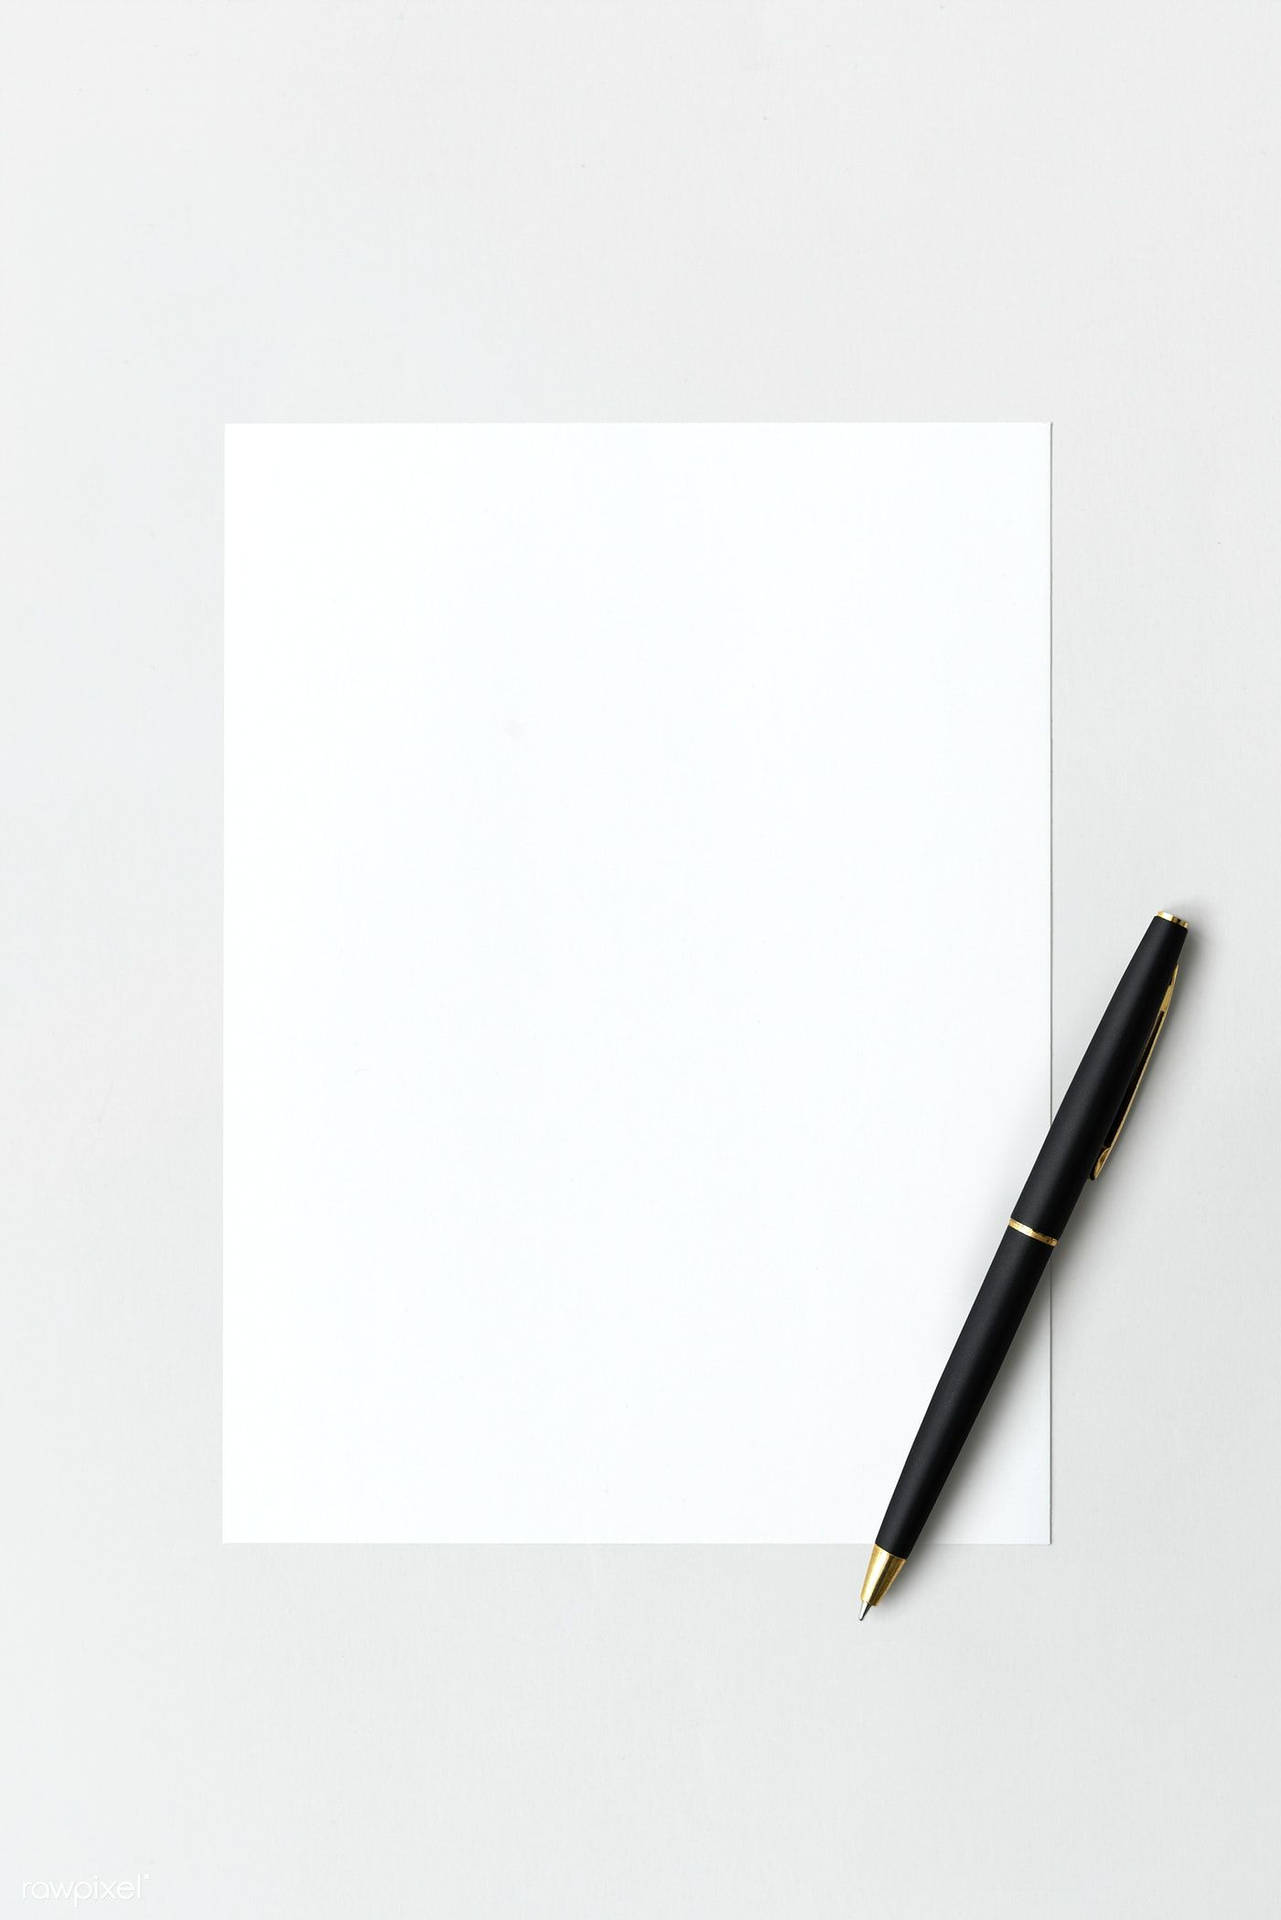 Free Blank White Wallpaper Downloads, [100+] Blank White Wallpapers for  FREE 